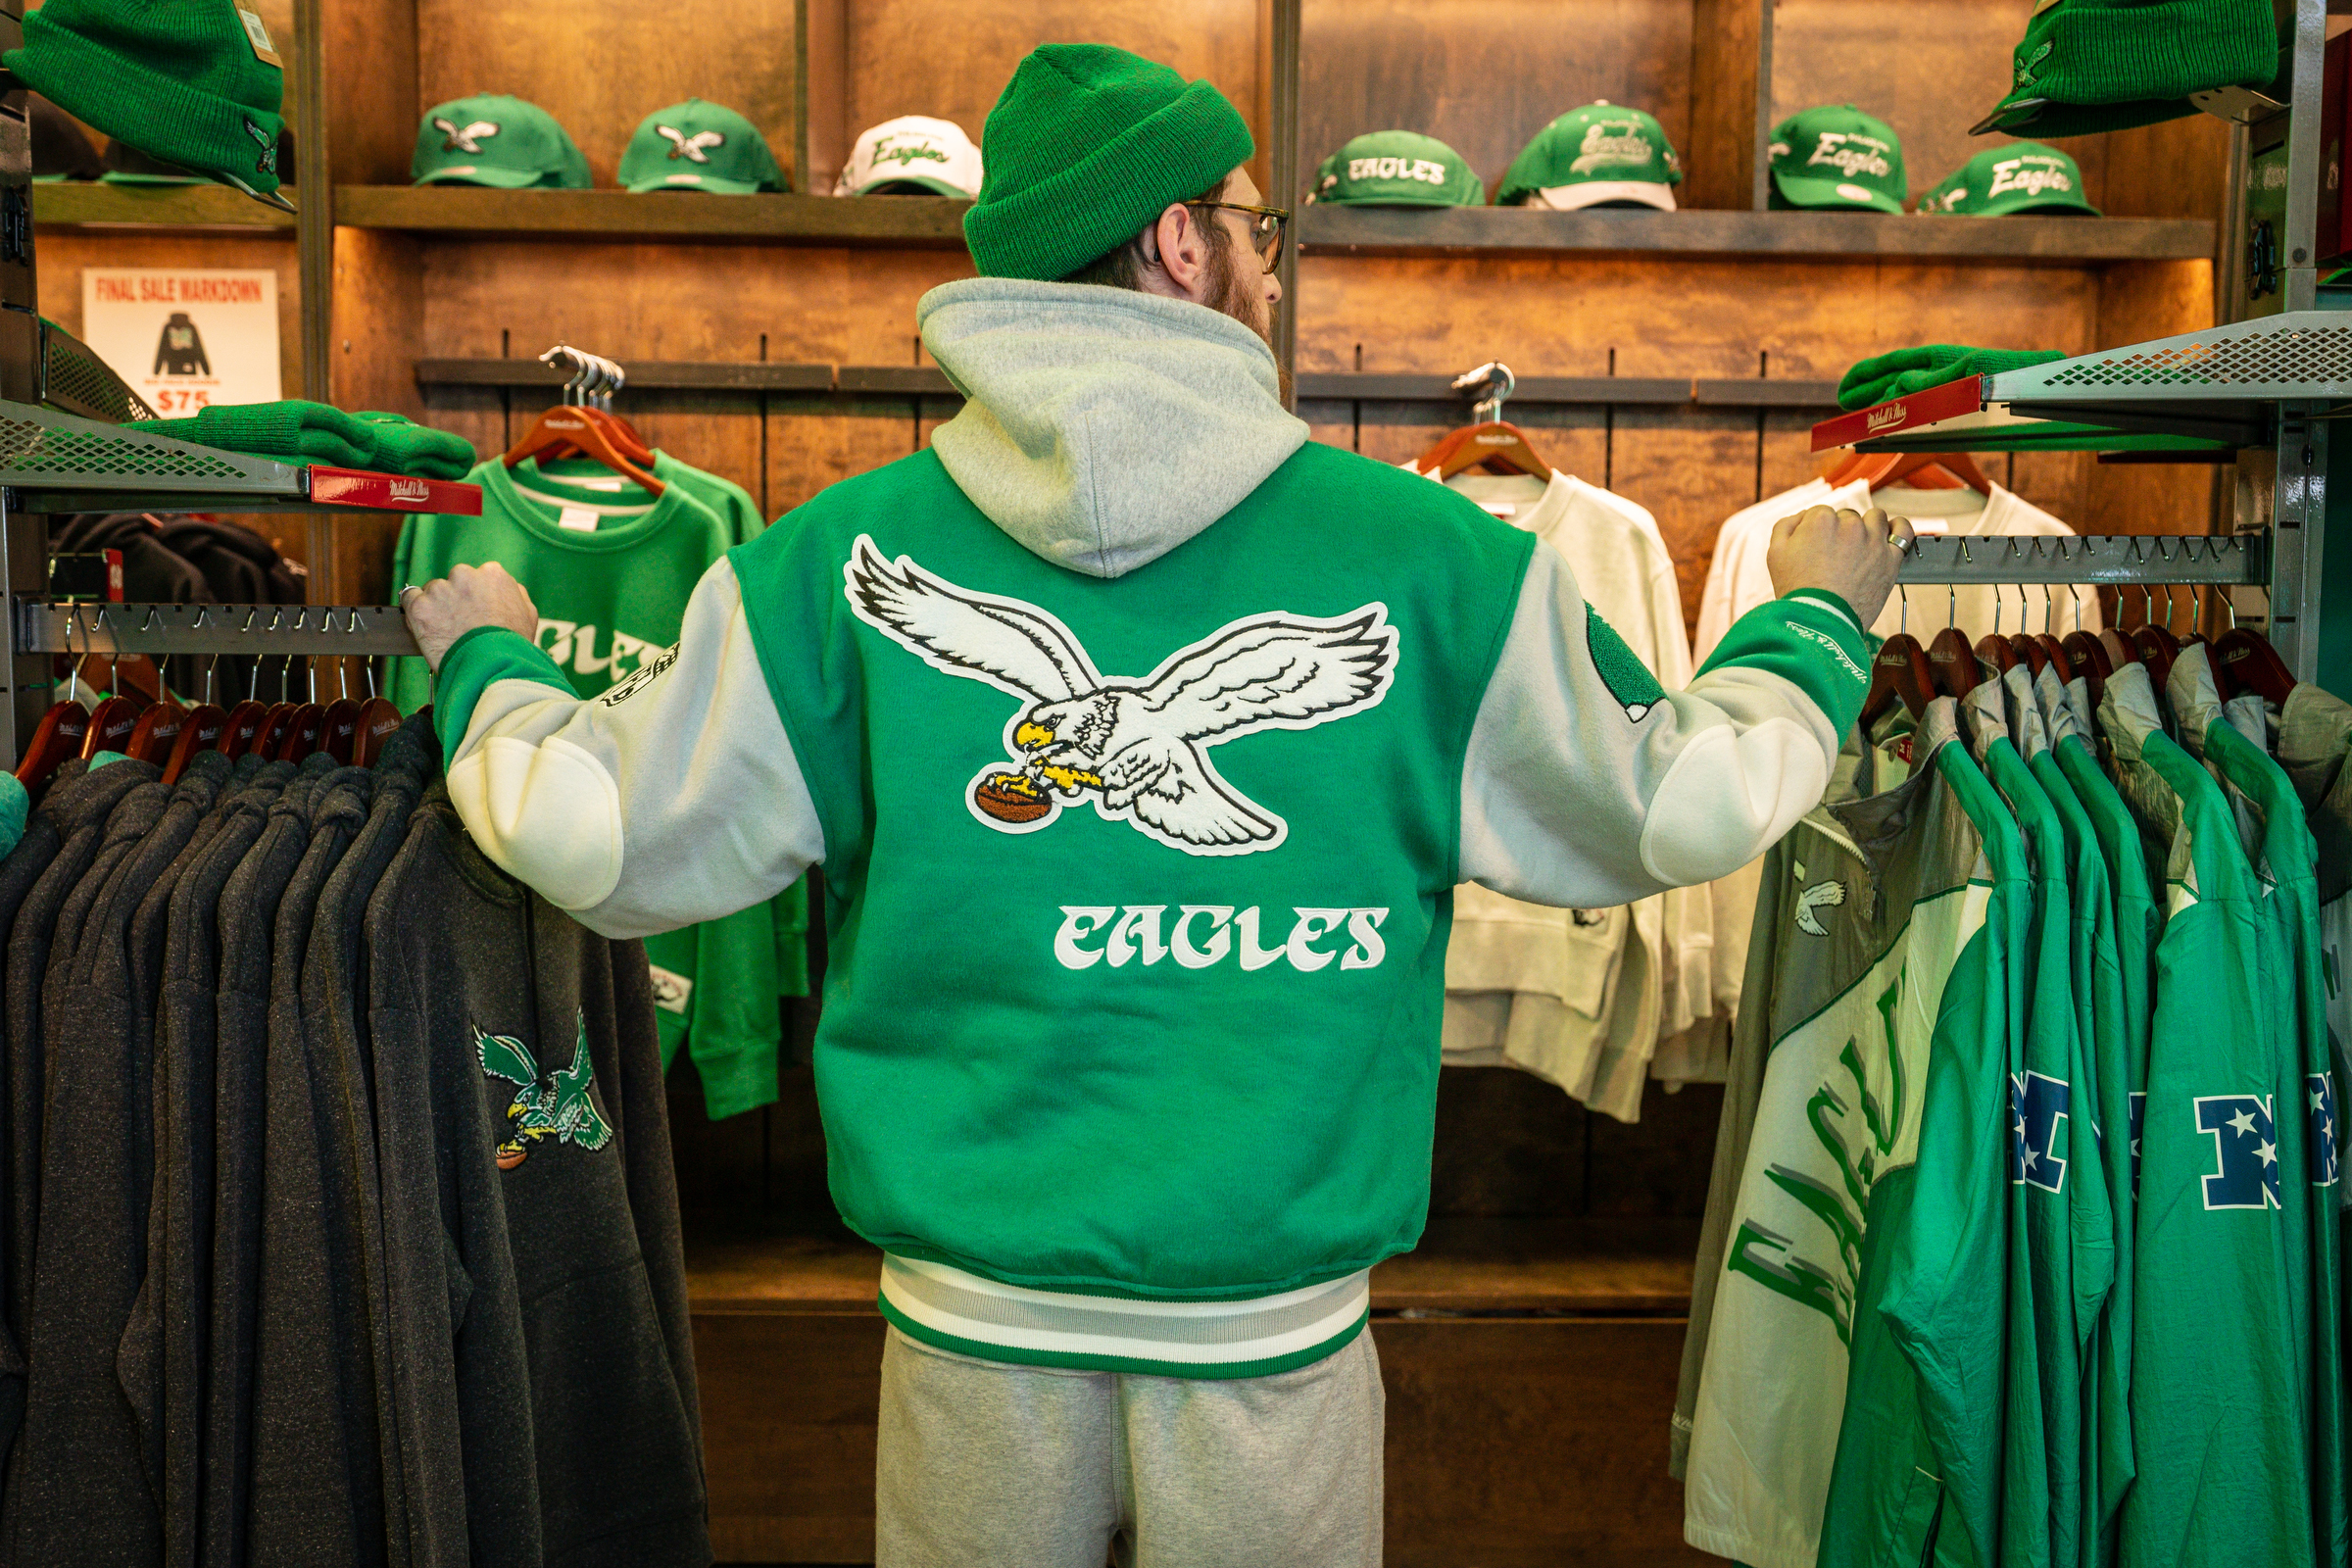 Where to buy kelly green Eagles jerseys and gear in Philly and New Jersey